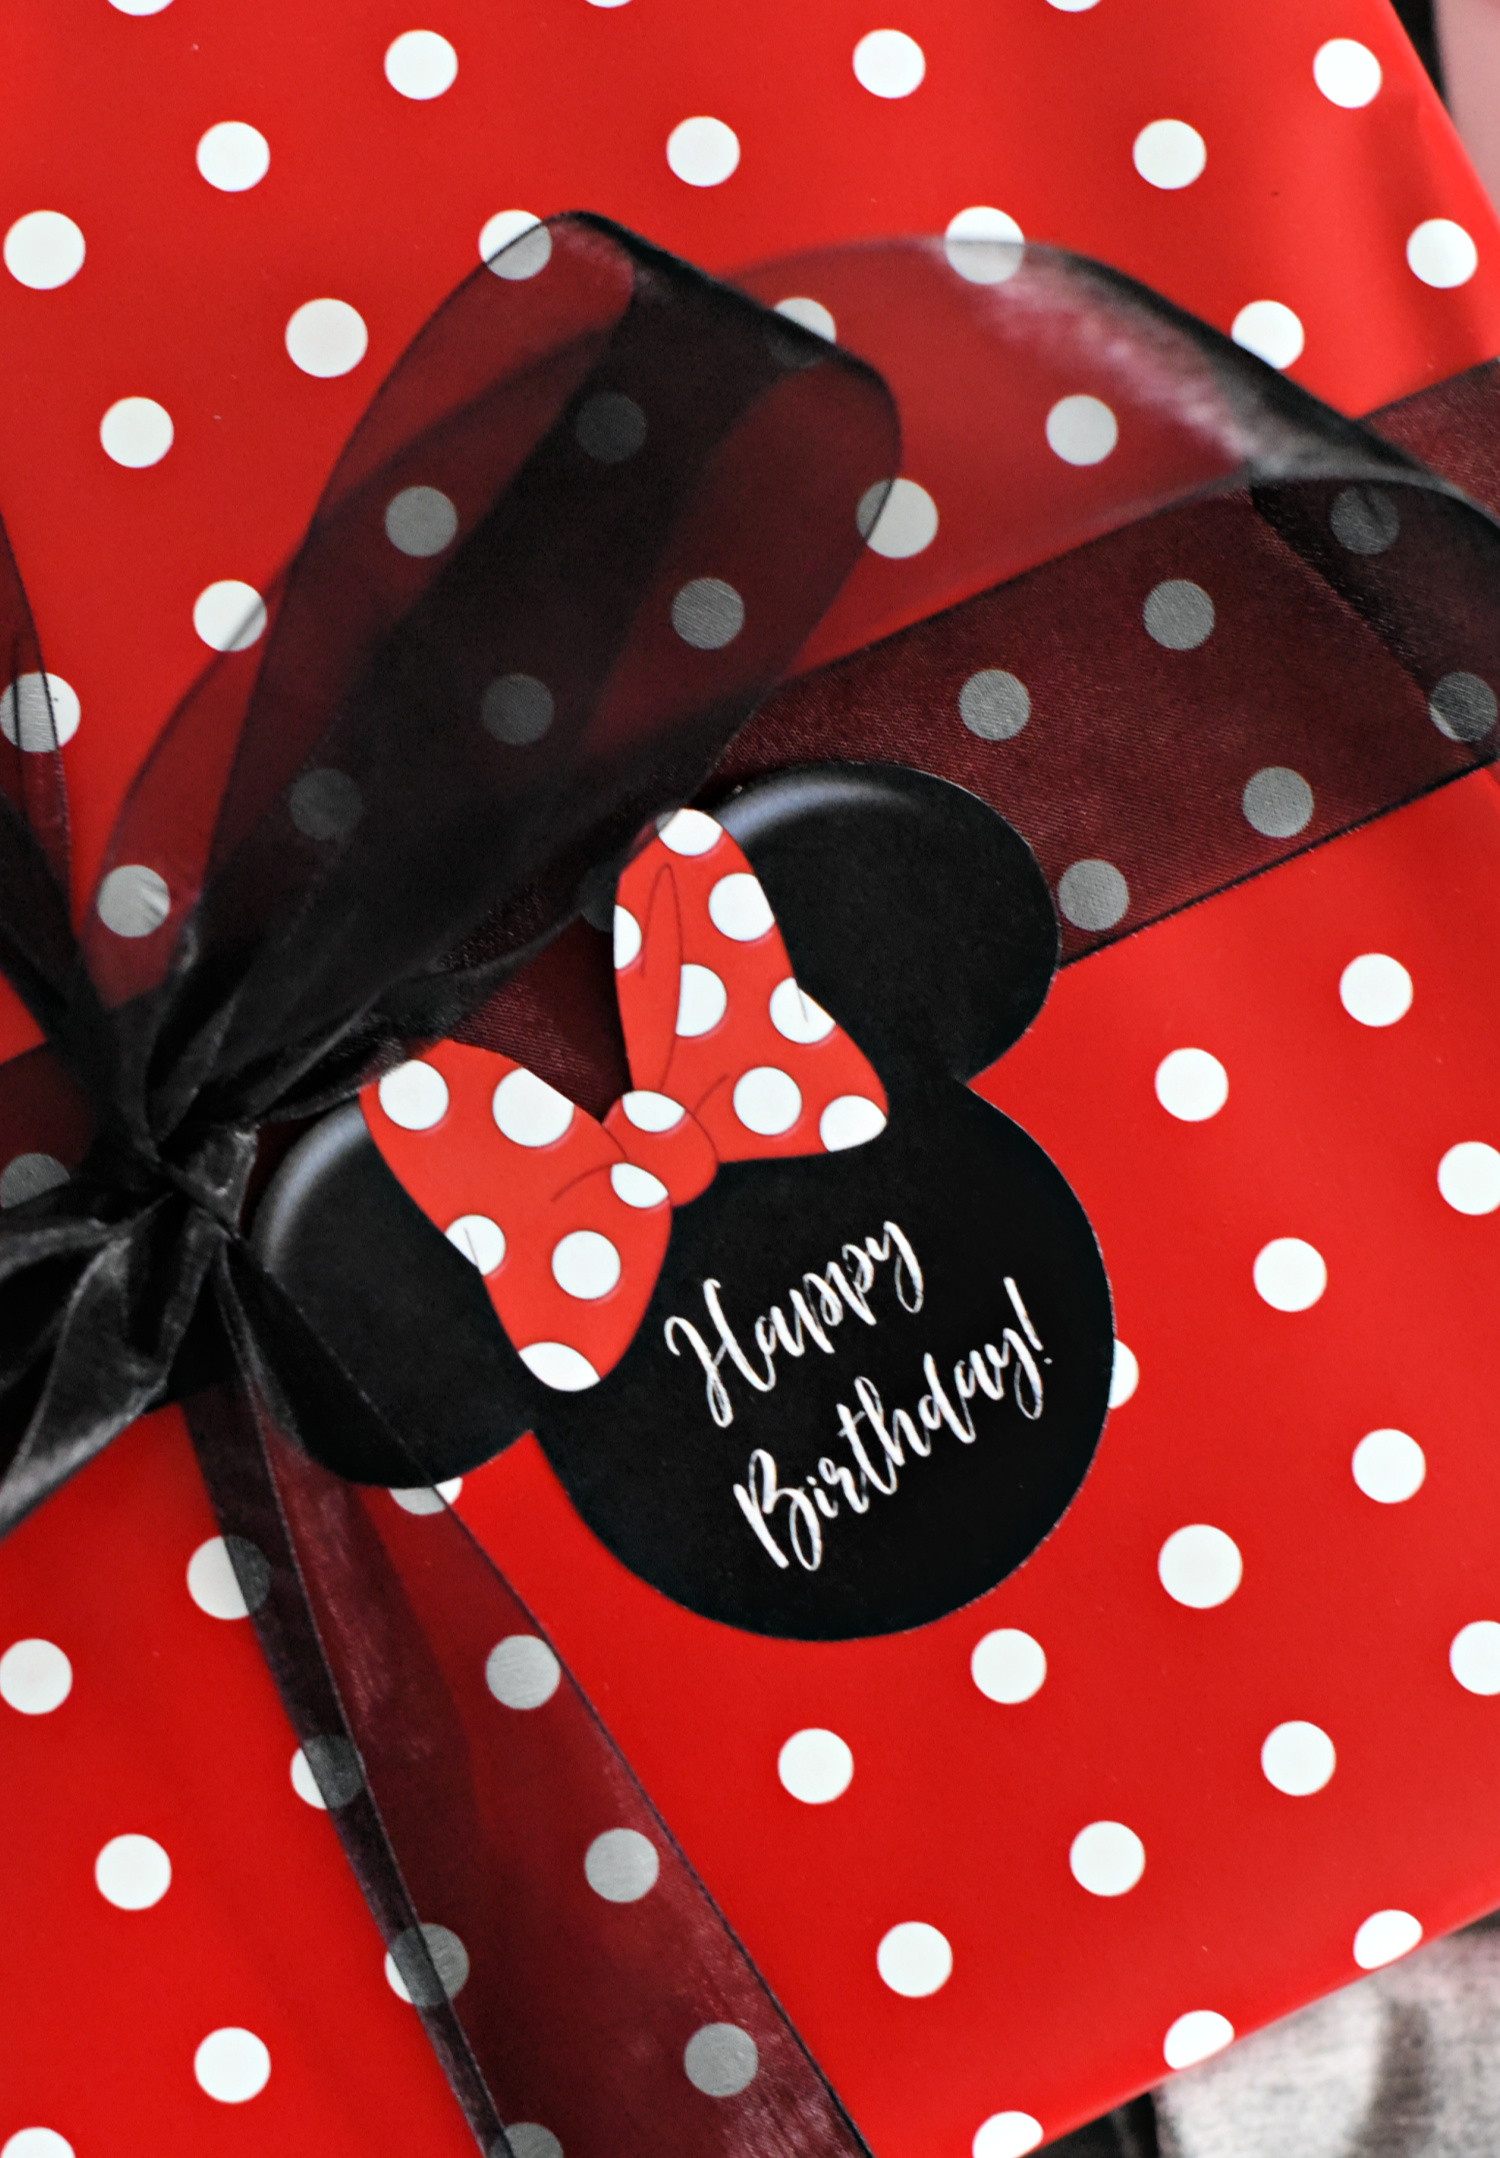 Minnie Mouse Gift Tag-Print this cute gift tag to add to any Disney themed birthday gift for friends! #minniemouse #disney #birthdaygifts #giftideas 